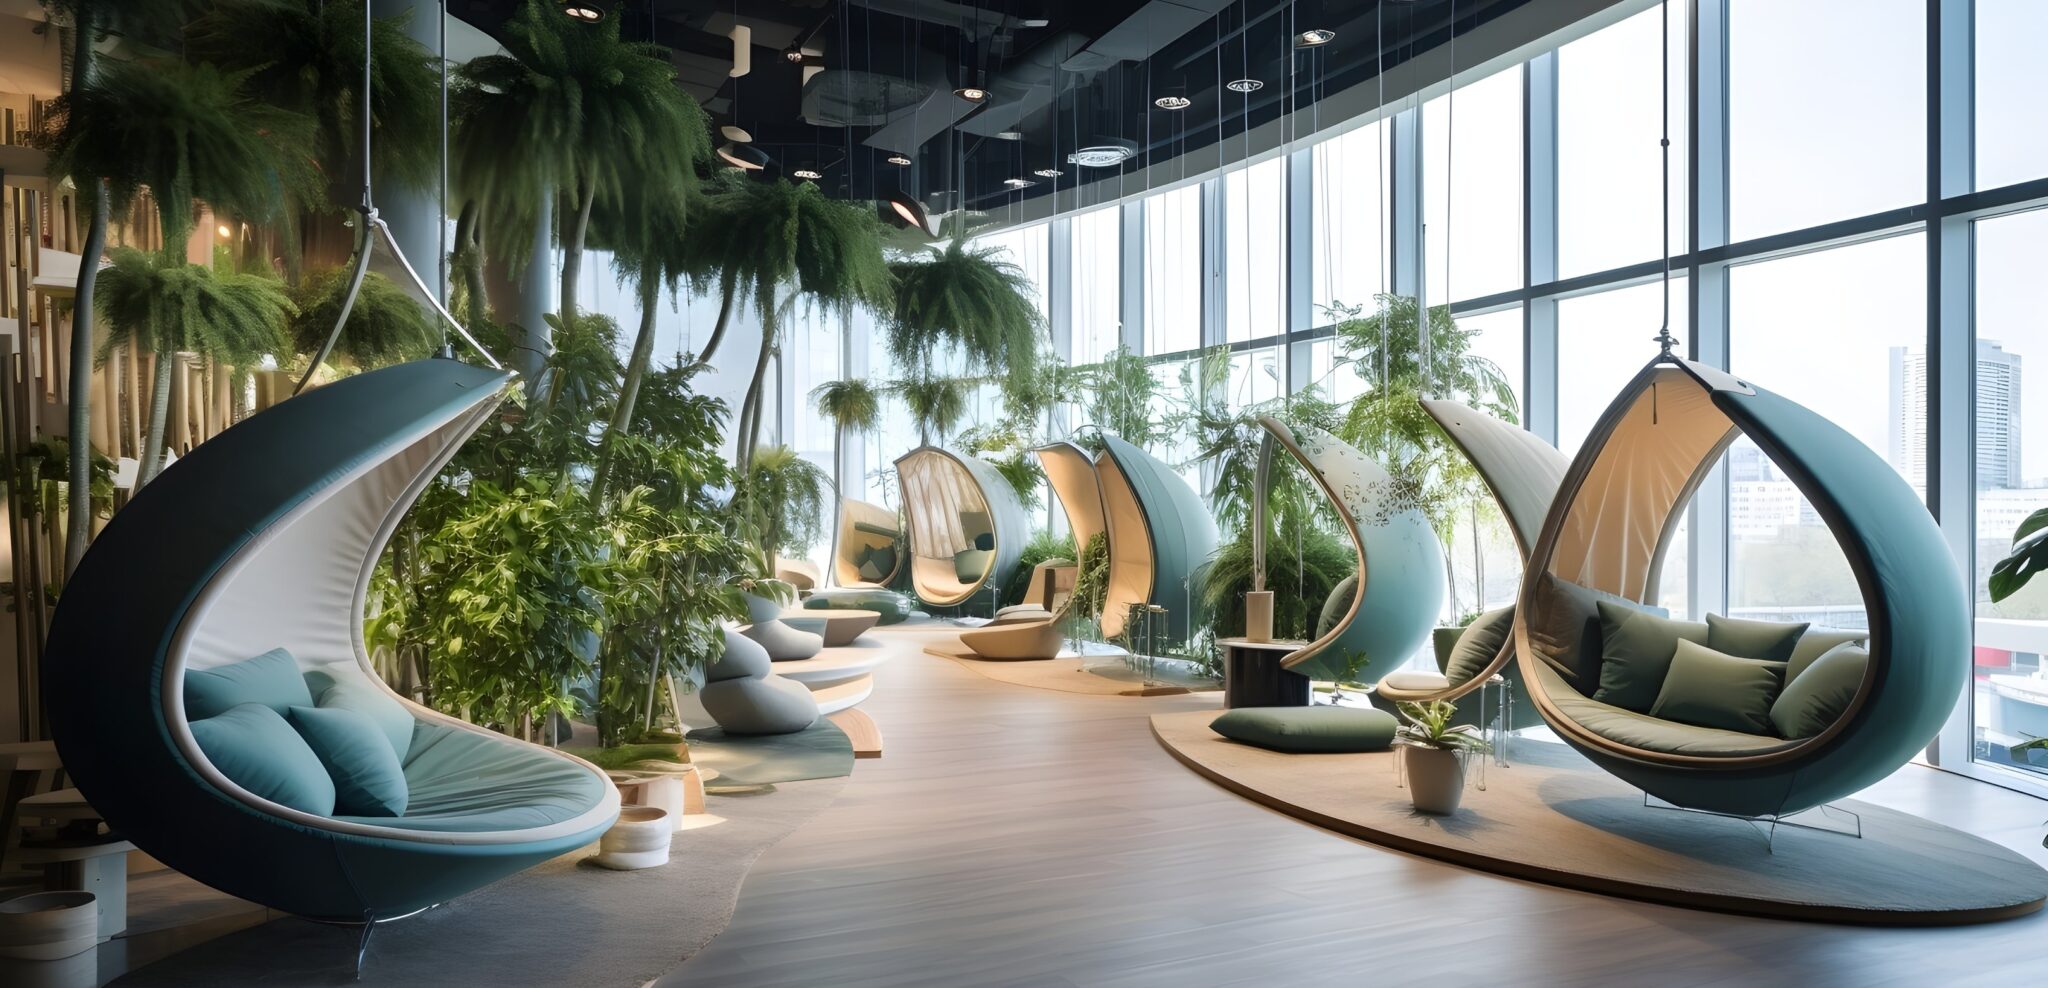 A contemporary office setting is captured in this image, complete with suspended seating and verdant foliage, promoting a calm and productive environment.